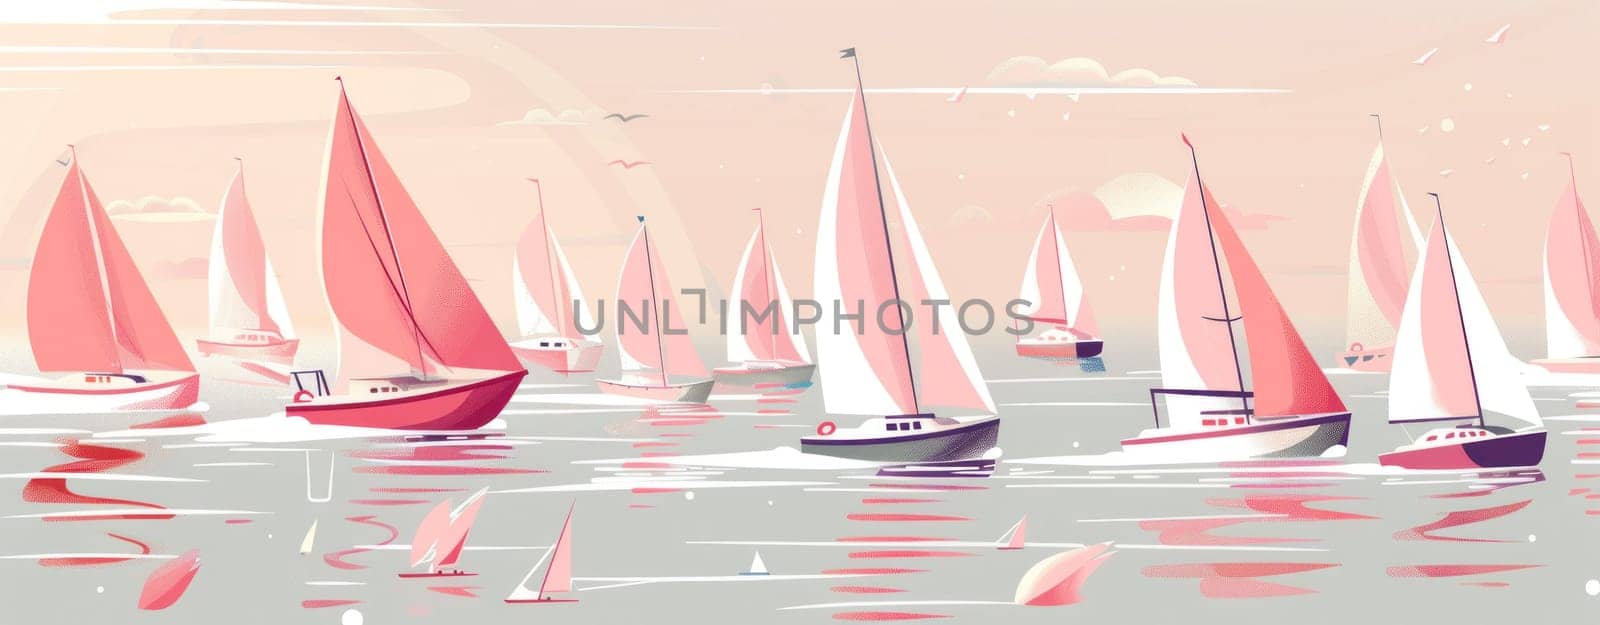 Sailboats on water tranquil pink and white seascape with clouds in background for travel and relaxation inspiration by Vichizh